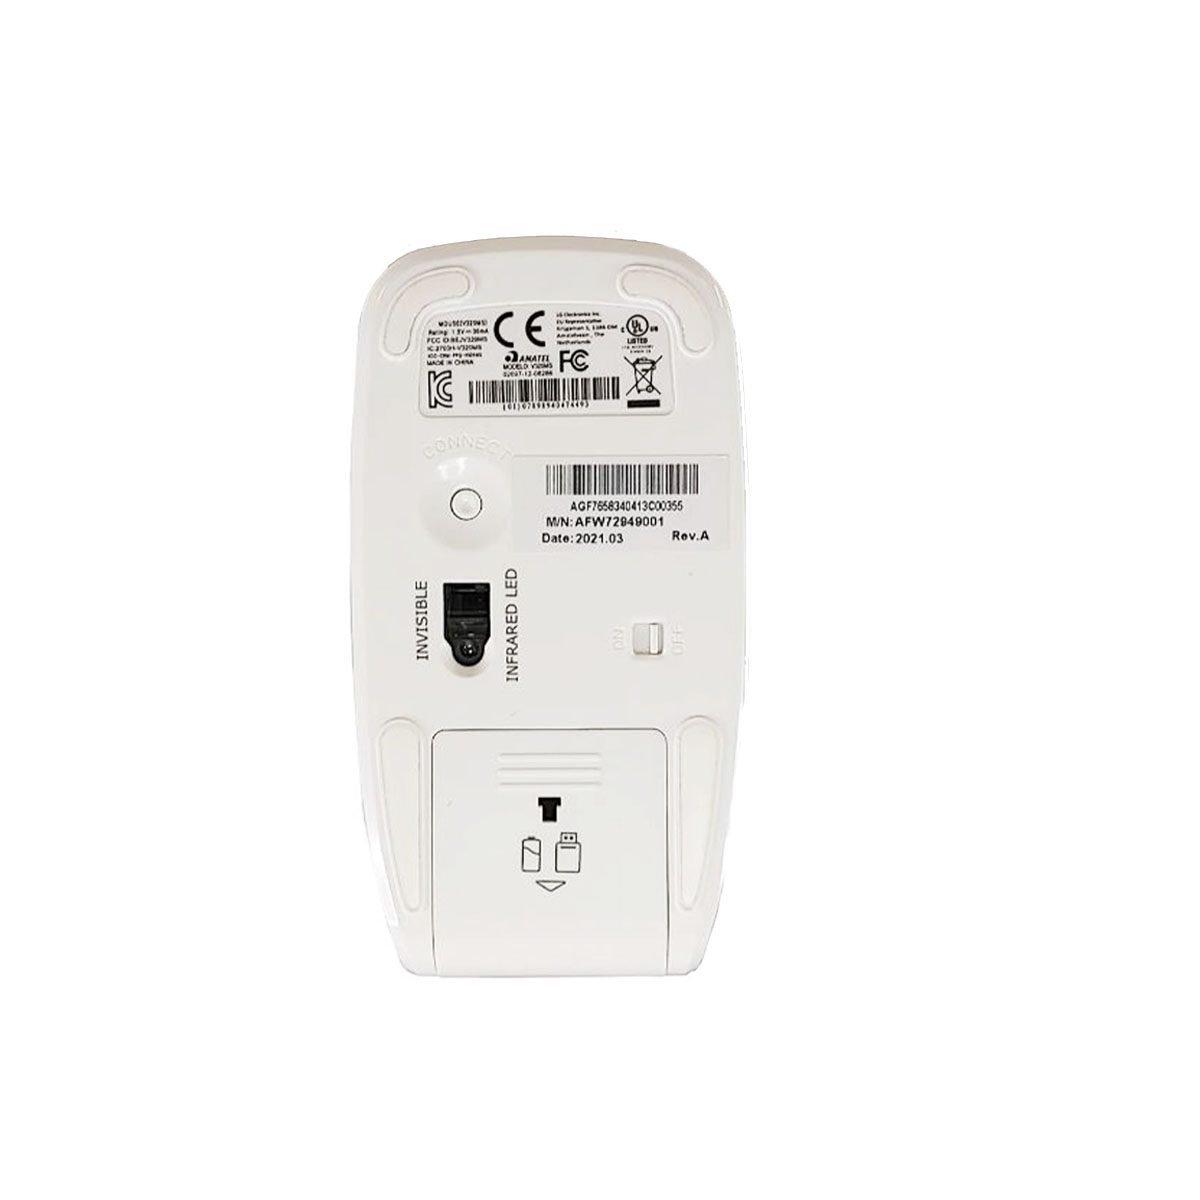 Mouse sem fio All In One LG  AFW72949001